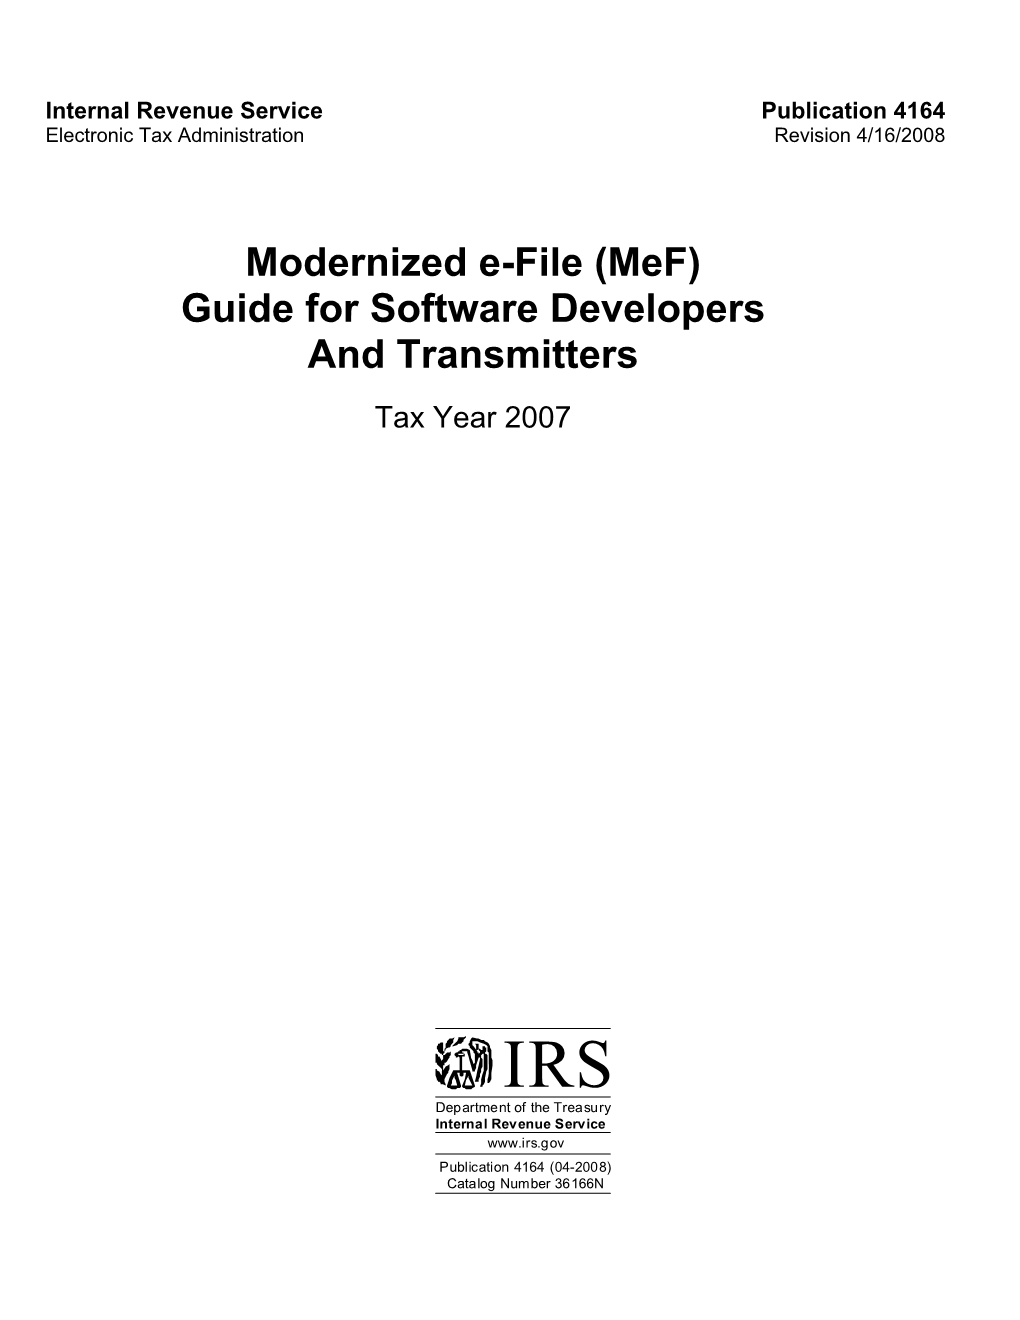 Modernized E-File (Mef) Guide for Software Developers and Transmitters